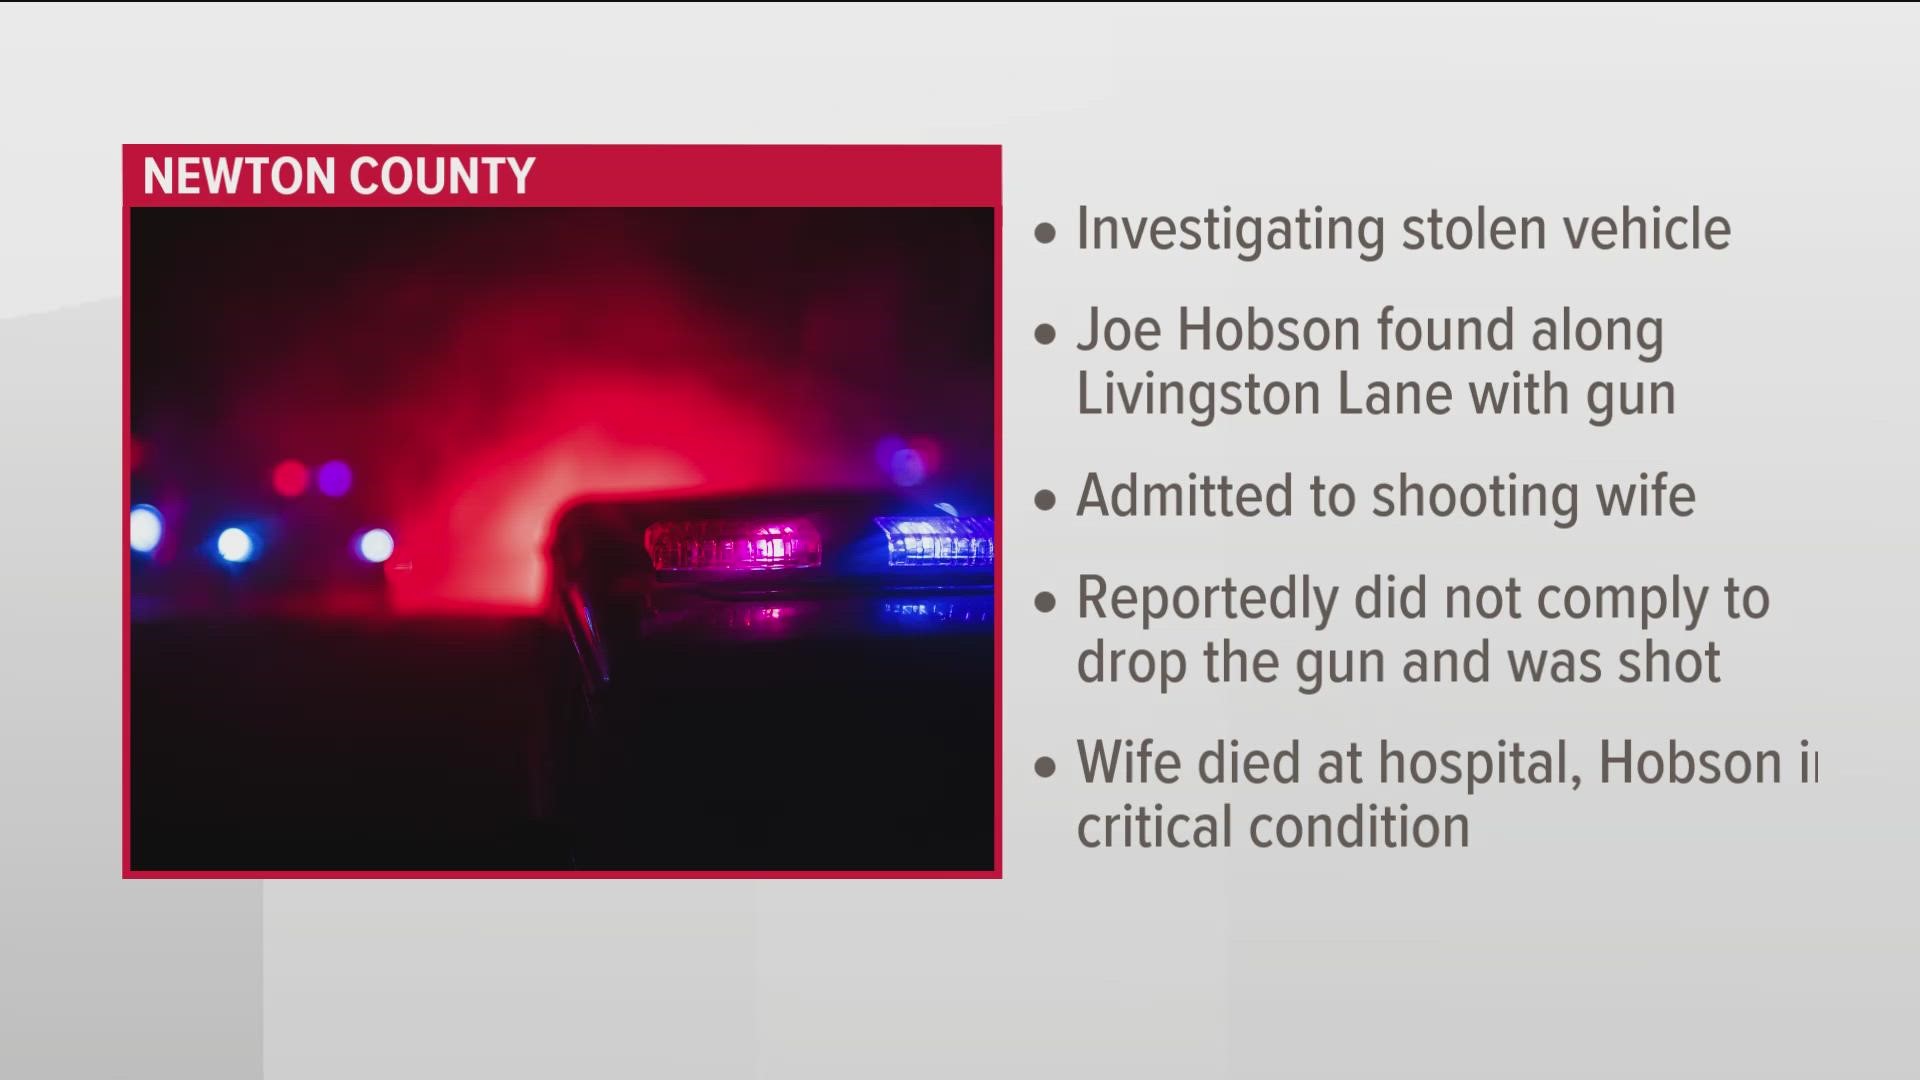 Joe Hobson was shot after deputies told him to put down his gun several times. His wife was later found lying down in the yard on the side of the house.